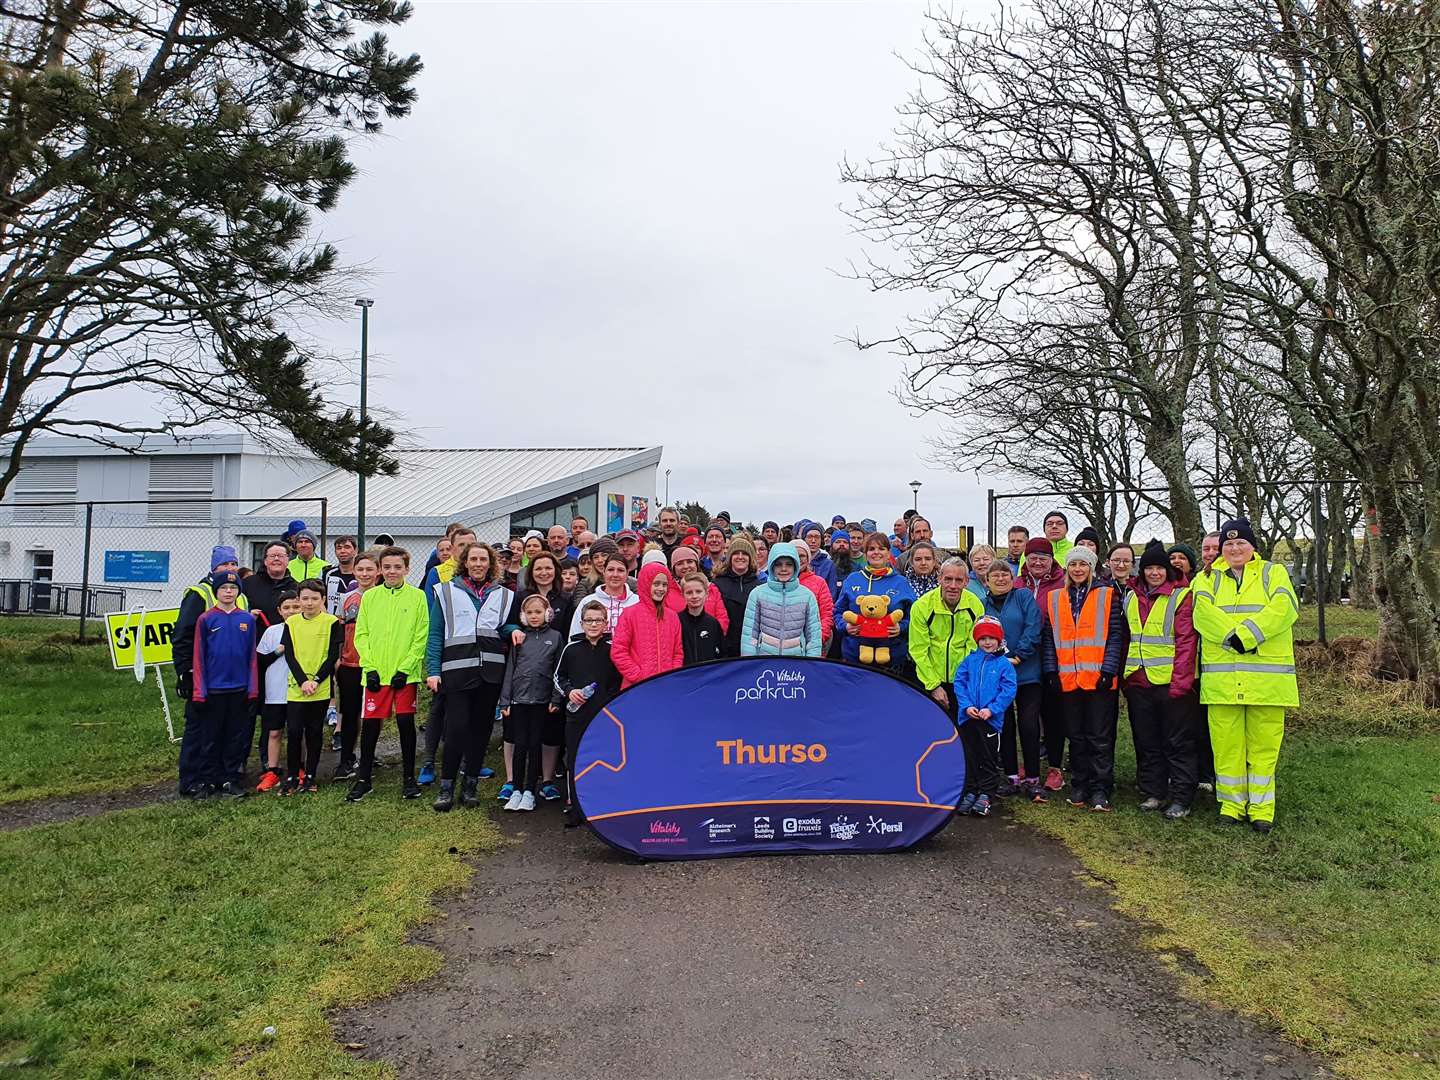 Runners and walkers at the start of Saturday's Thurso parkrun marking International Women’s Day.